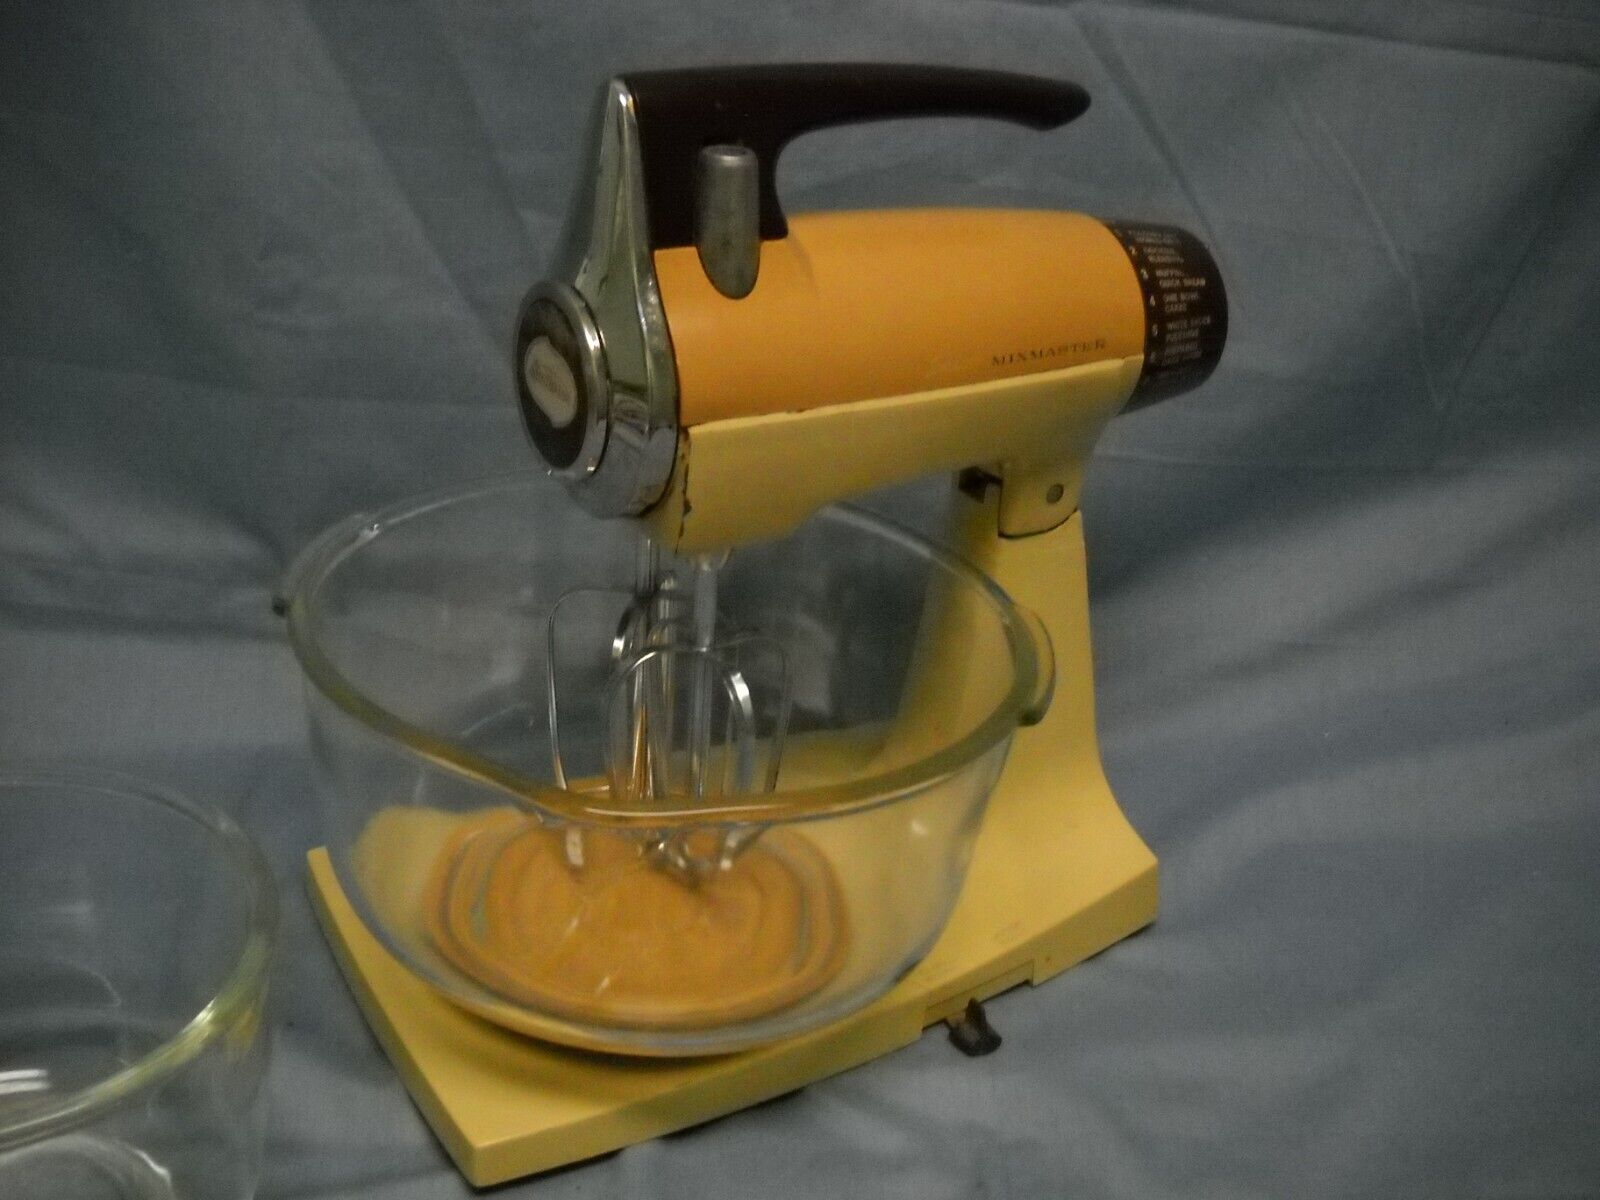 VTG Sunbeam Mixmaster Stand Mixer  With bowls and attachments